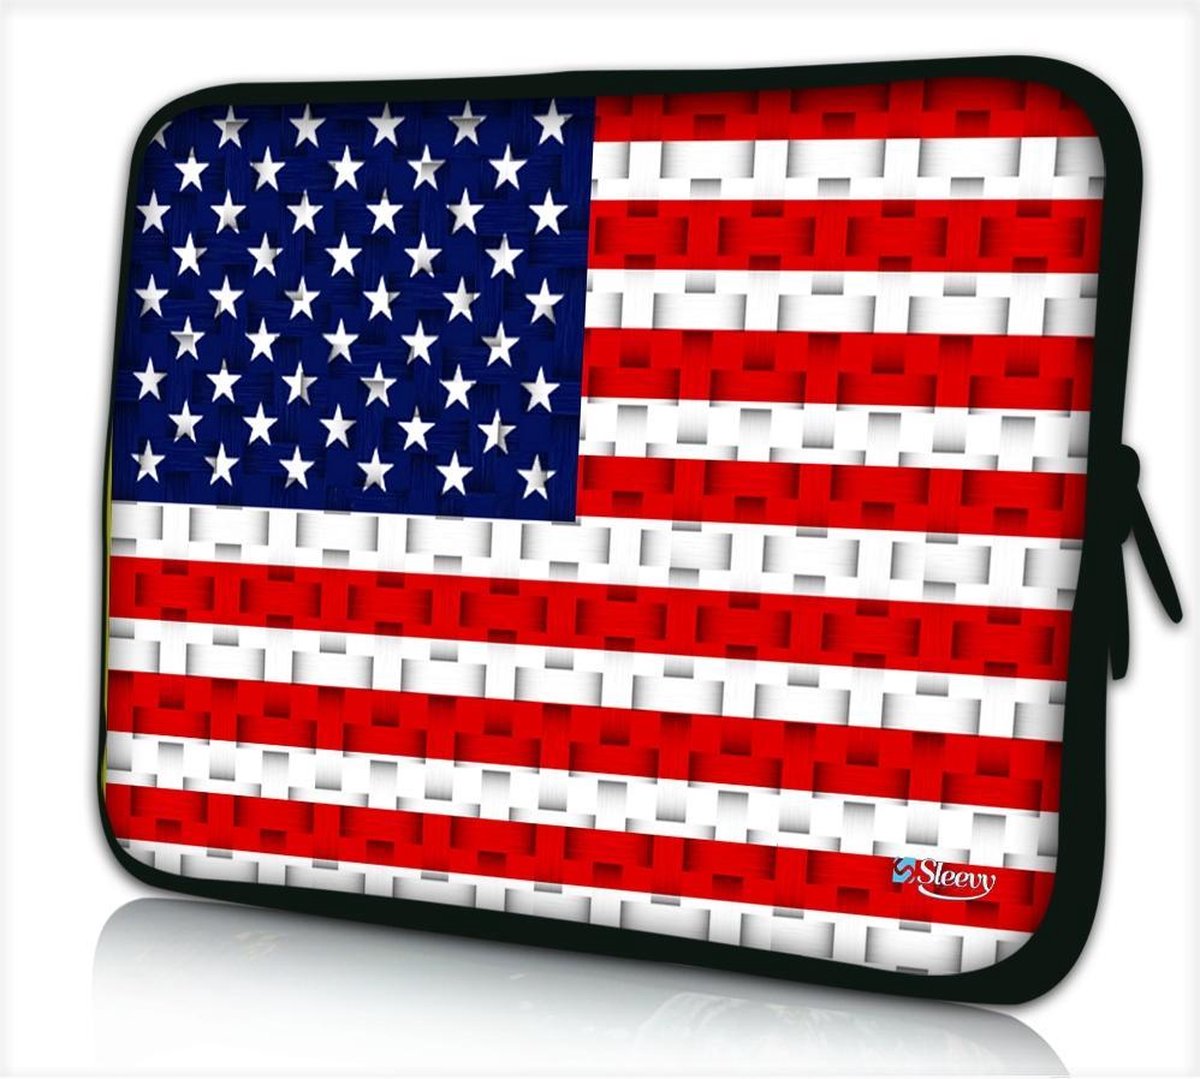 Sleevy 17,3 laptophoes USA vlag patroon - laptop sleeve - Sleevy collectie 300+ designs